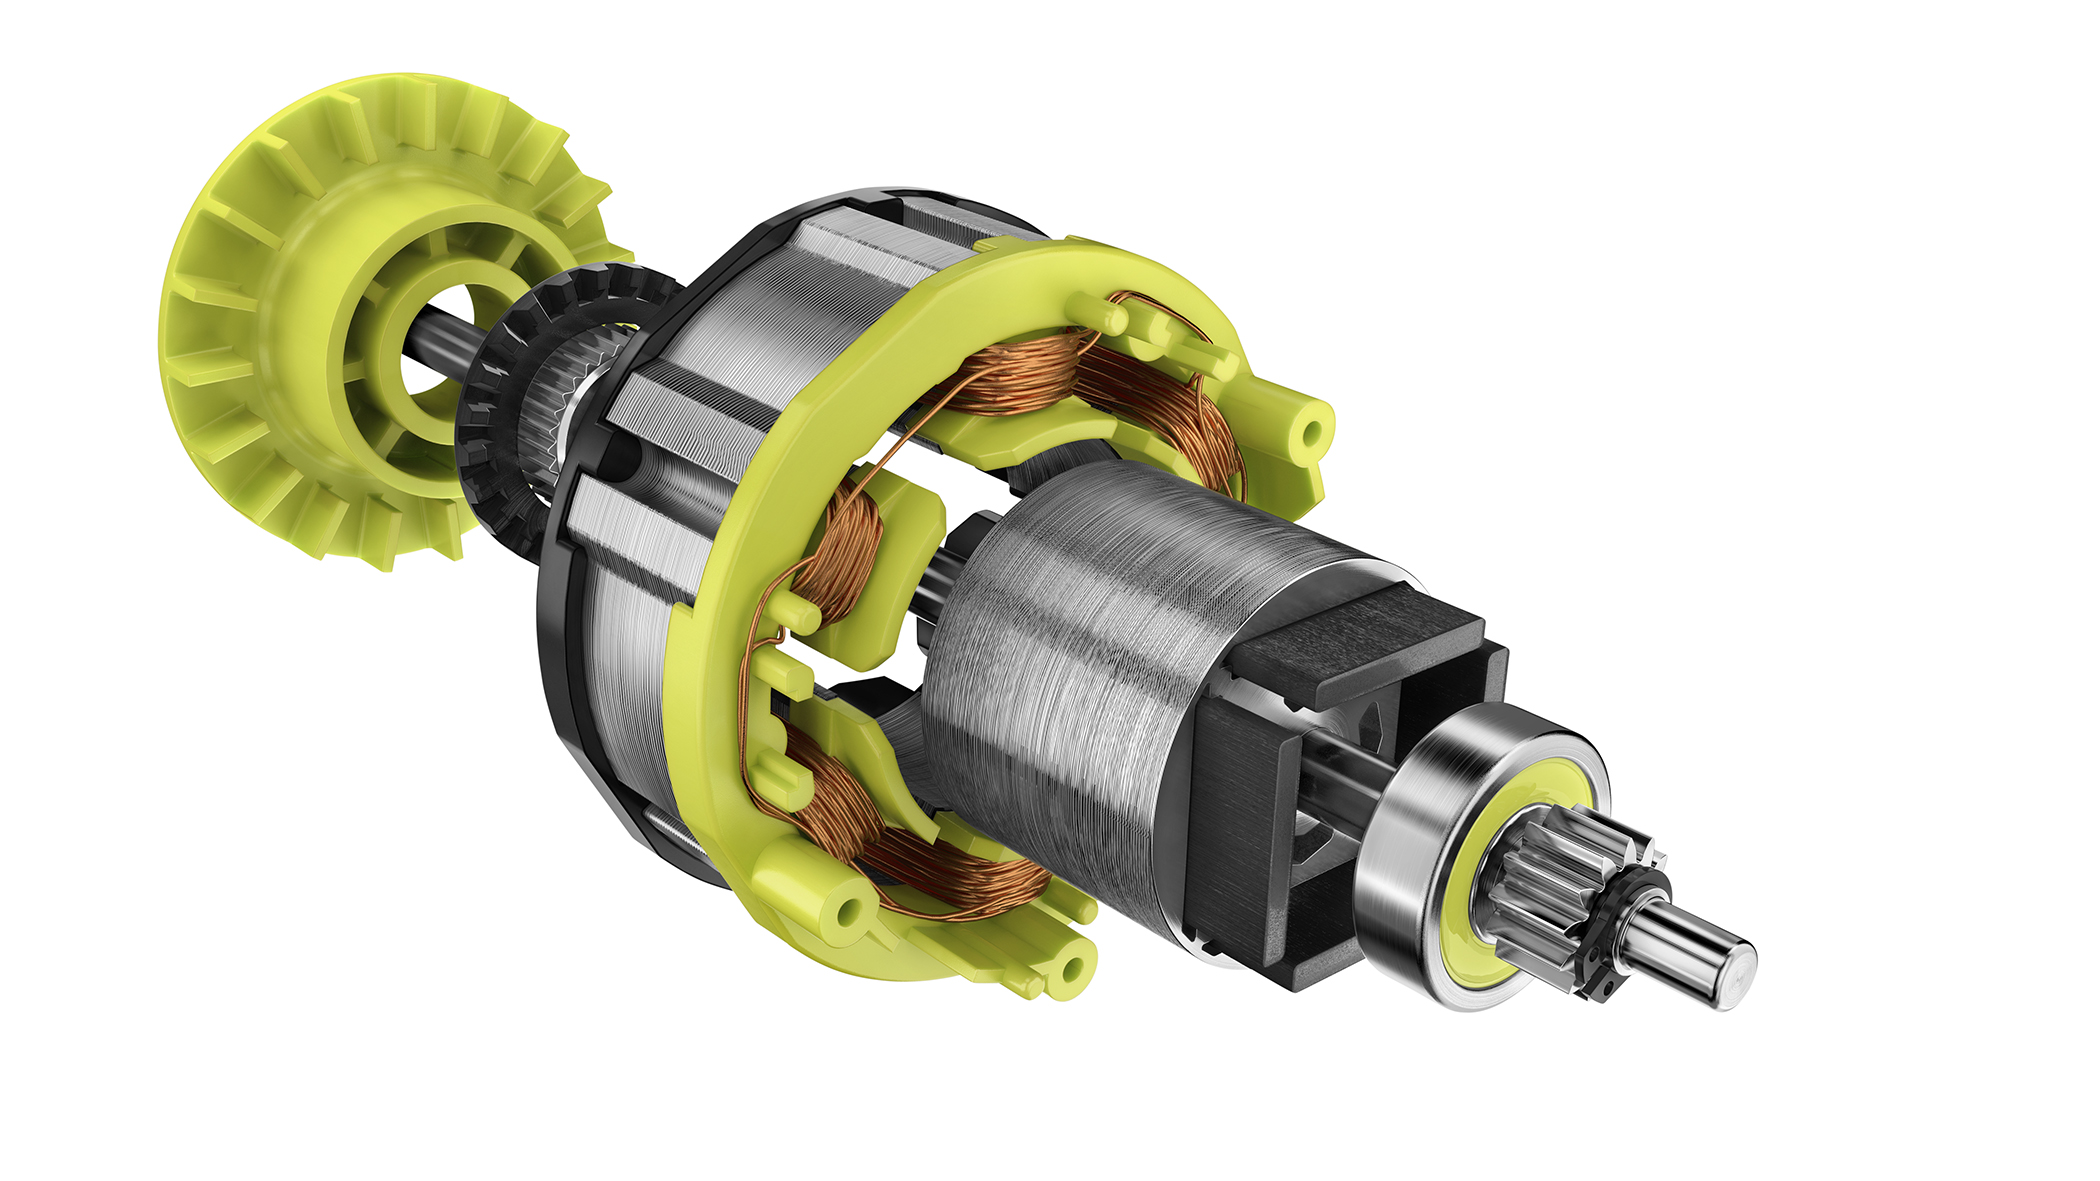 Photo: Up to 20% Faster Drilling and Up to 750 in-lbs. of Torque 